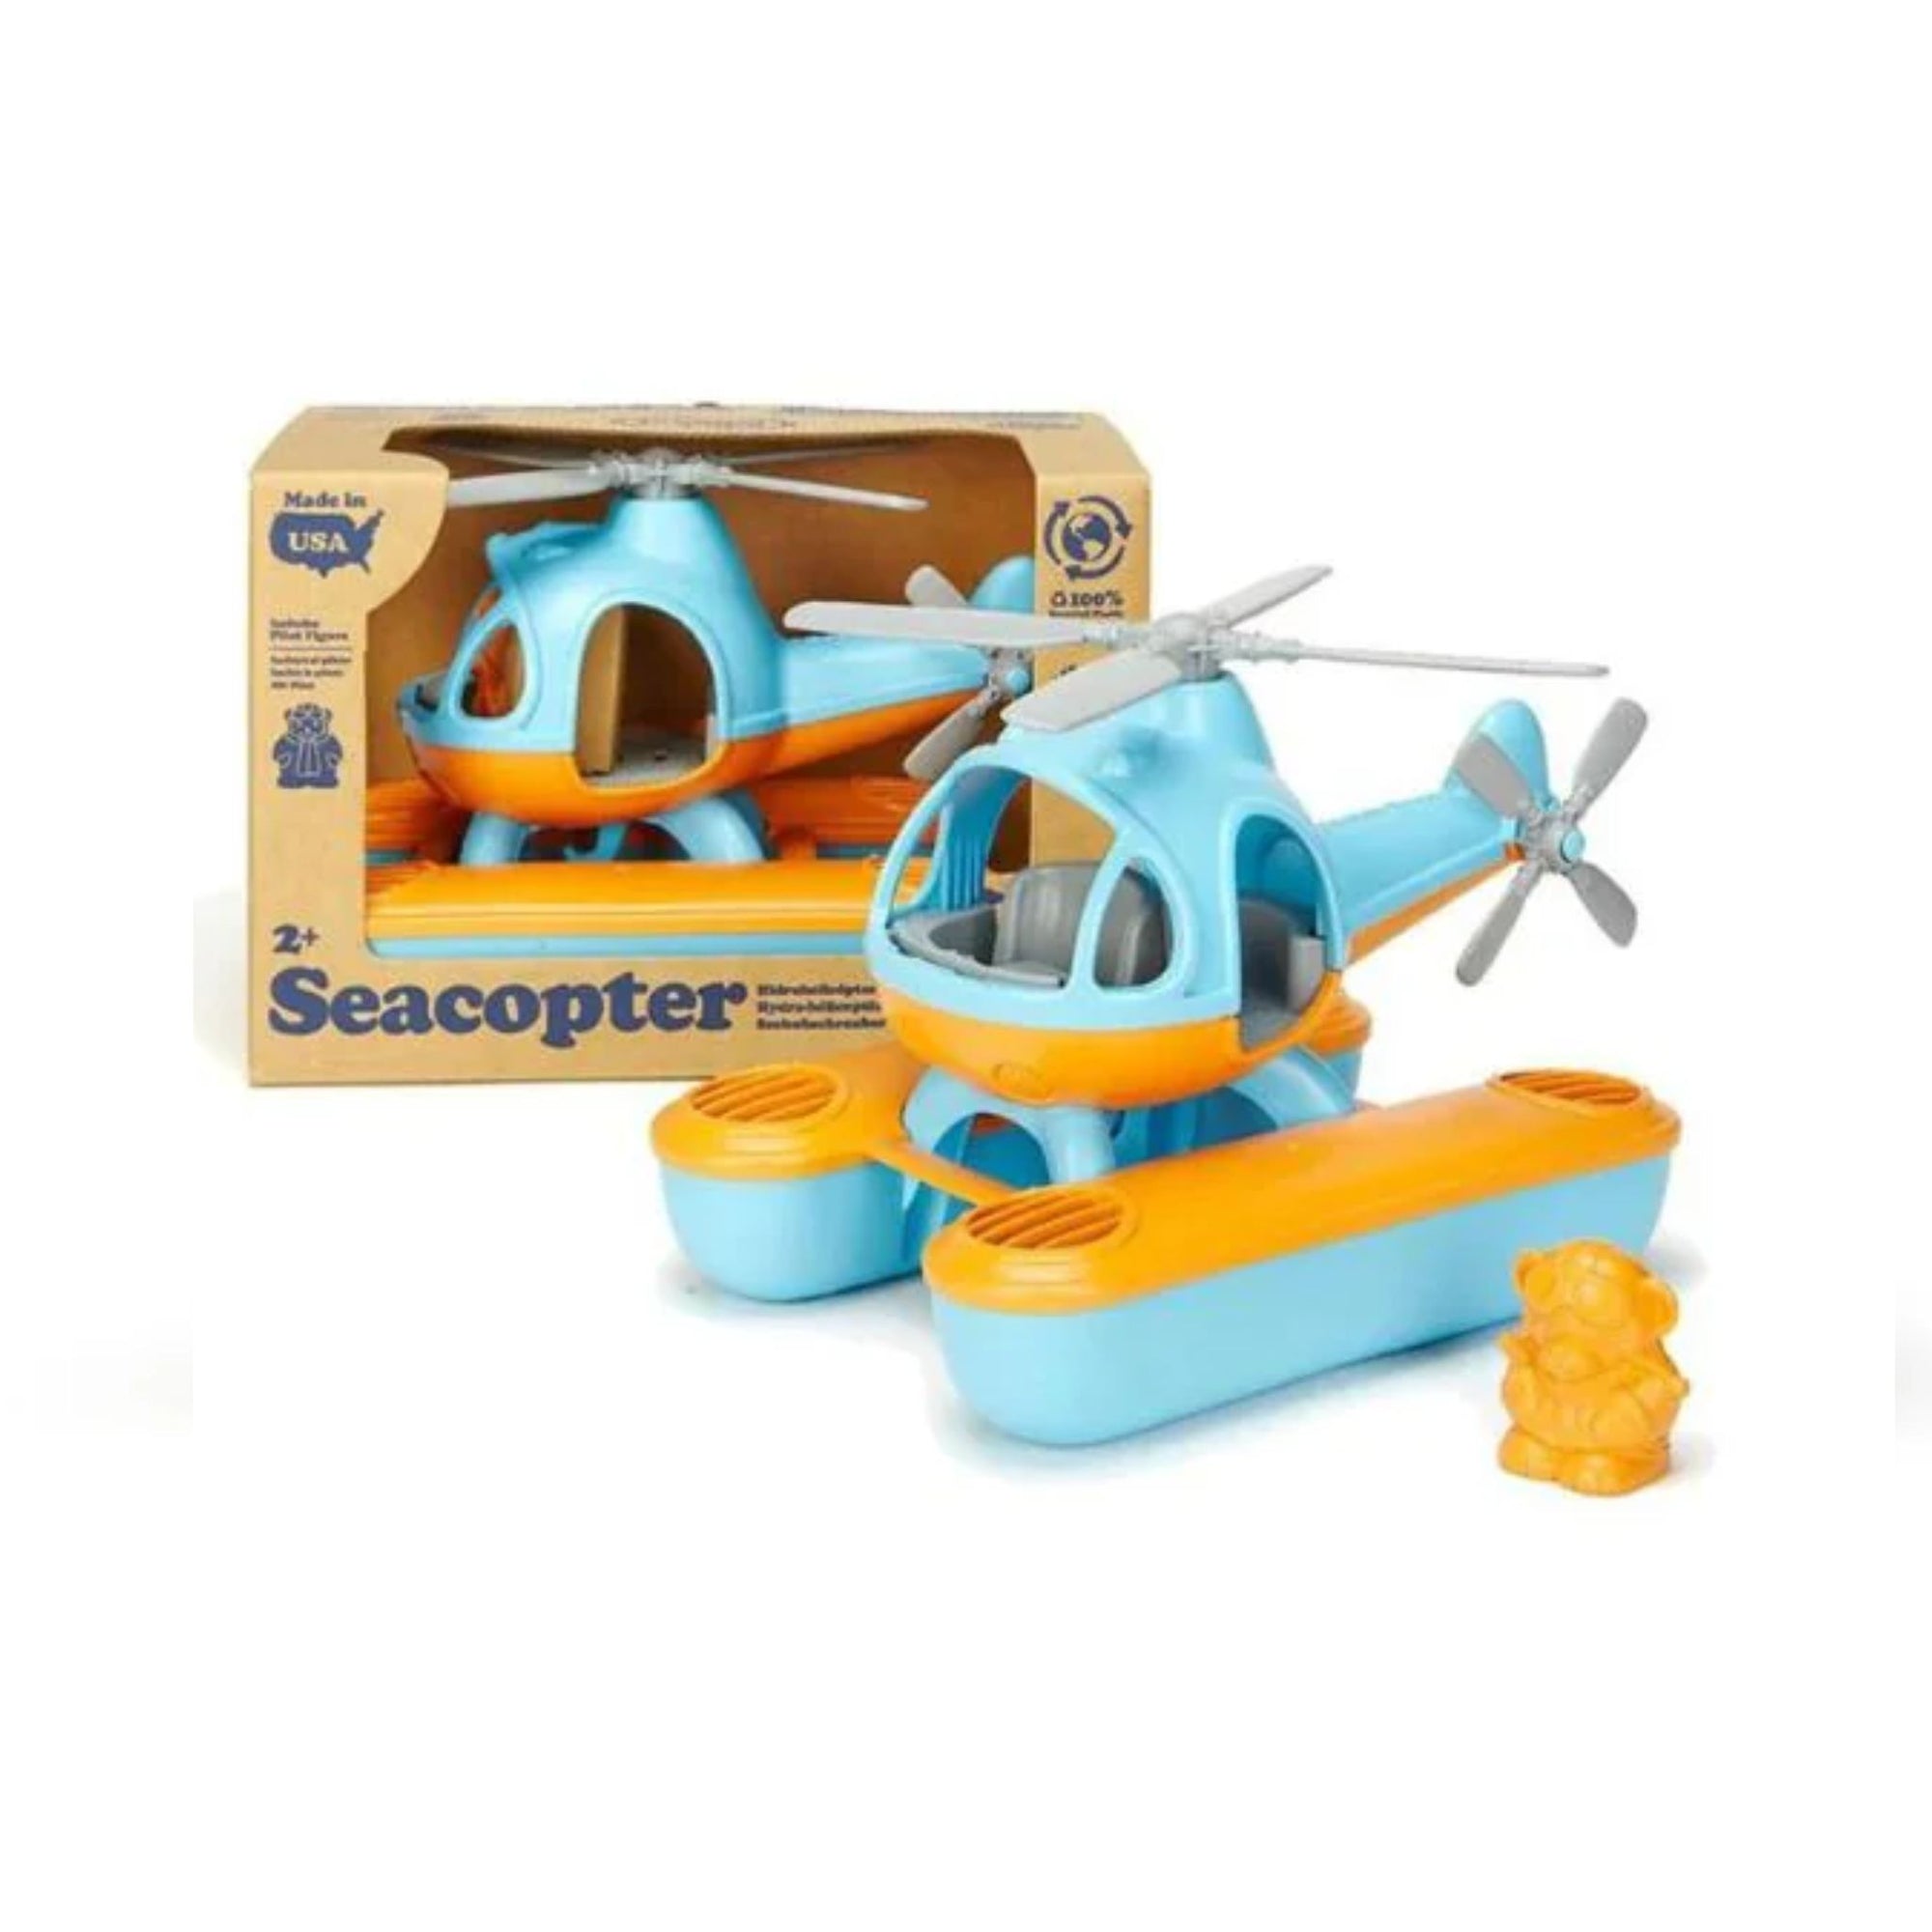 Green Toys Seacopter - Blue Top / Orange